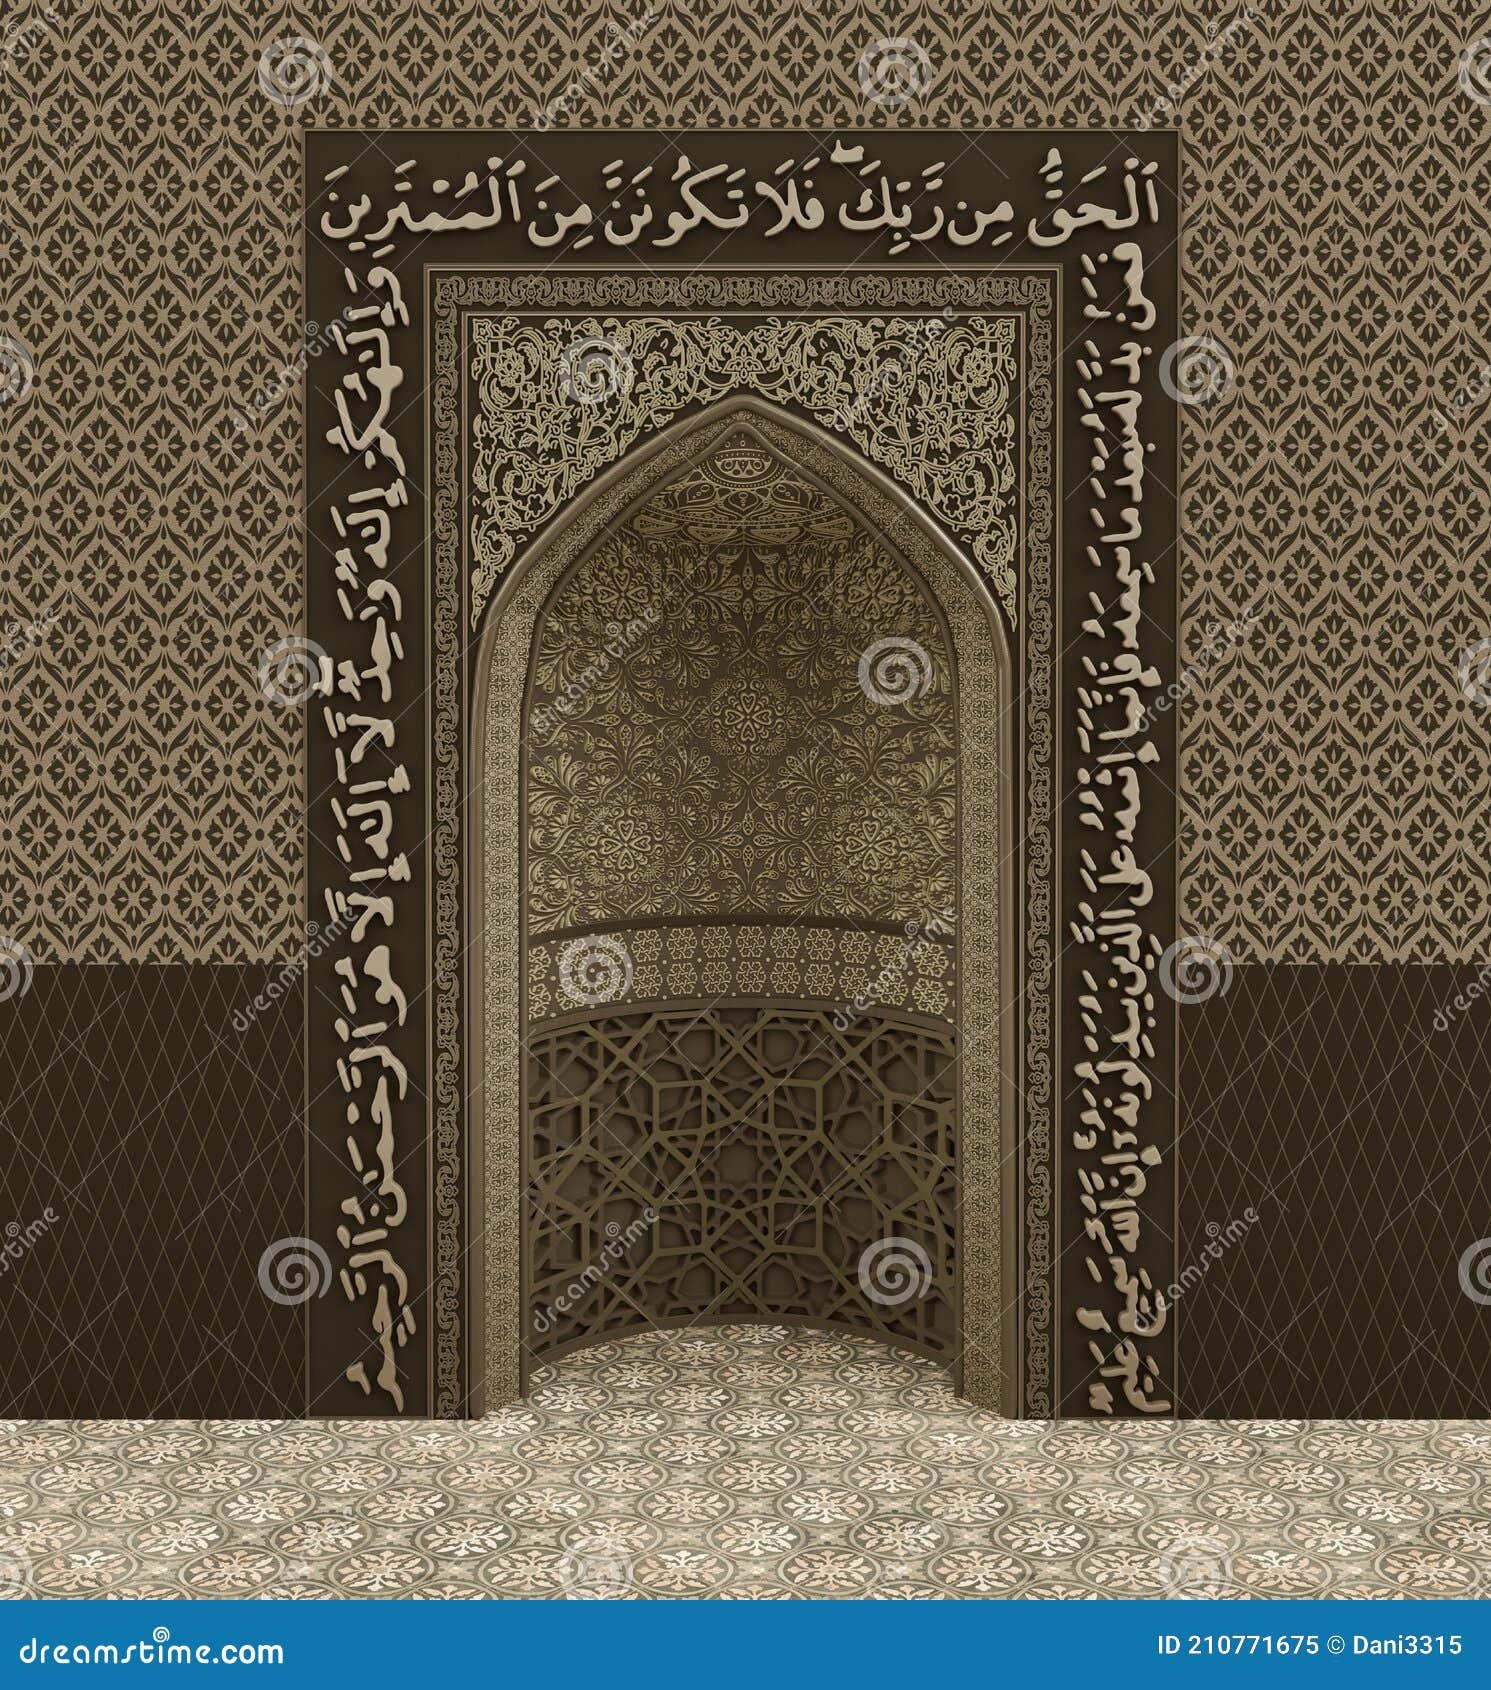 Albums 99+ Images a mihrab is a niche in a mosque that indicates the direction toward mecca Updated